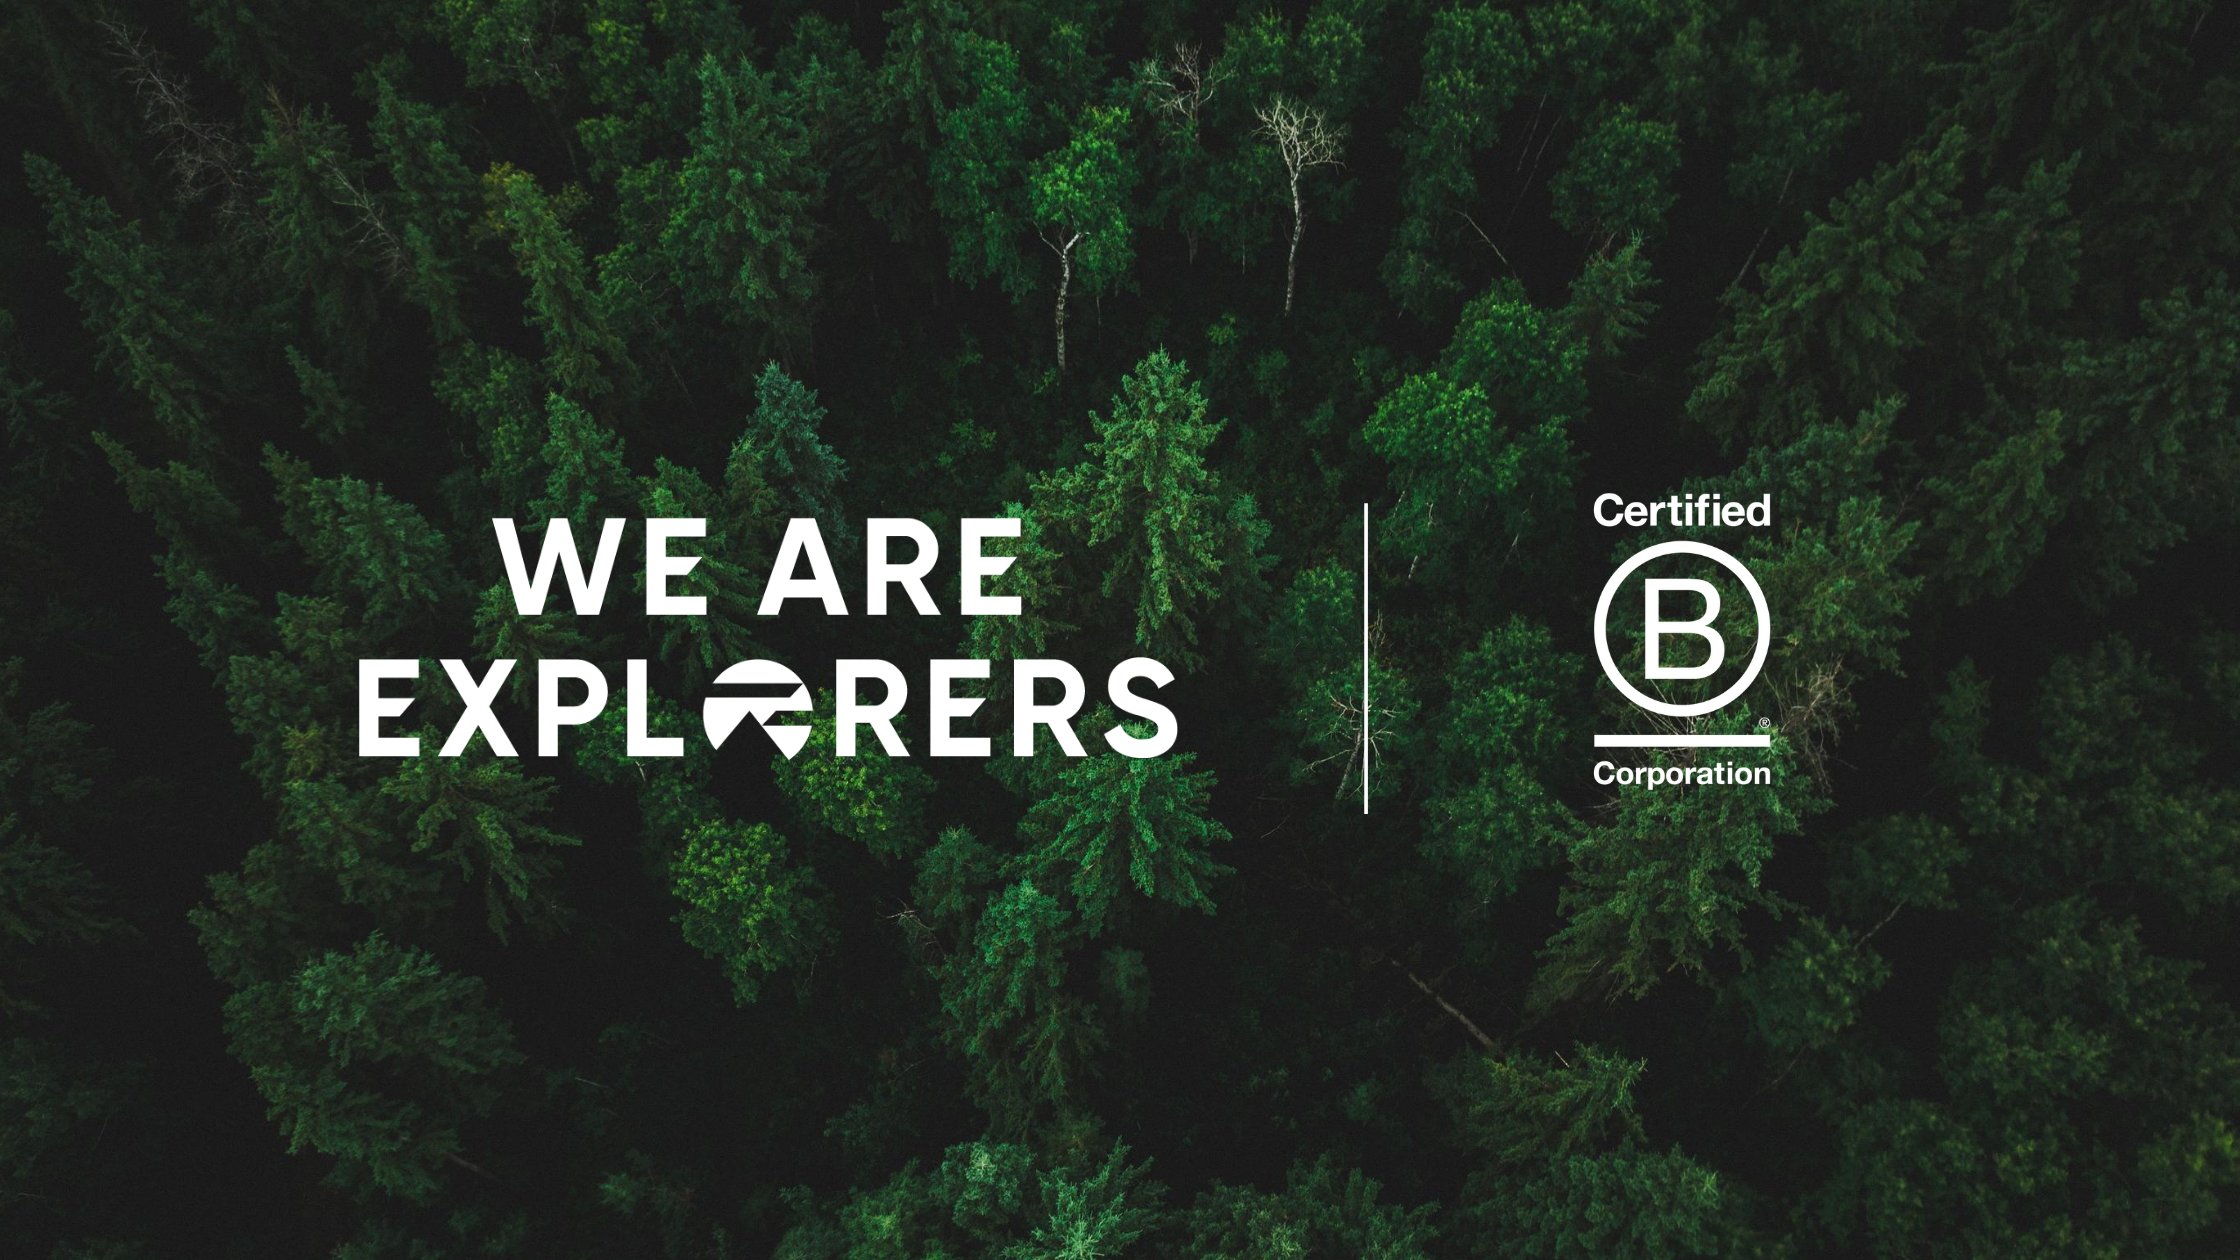 We Are Explorers B Corp certification